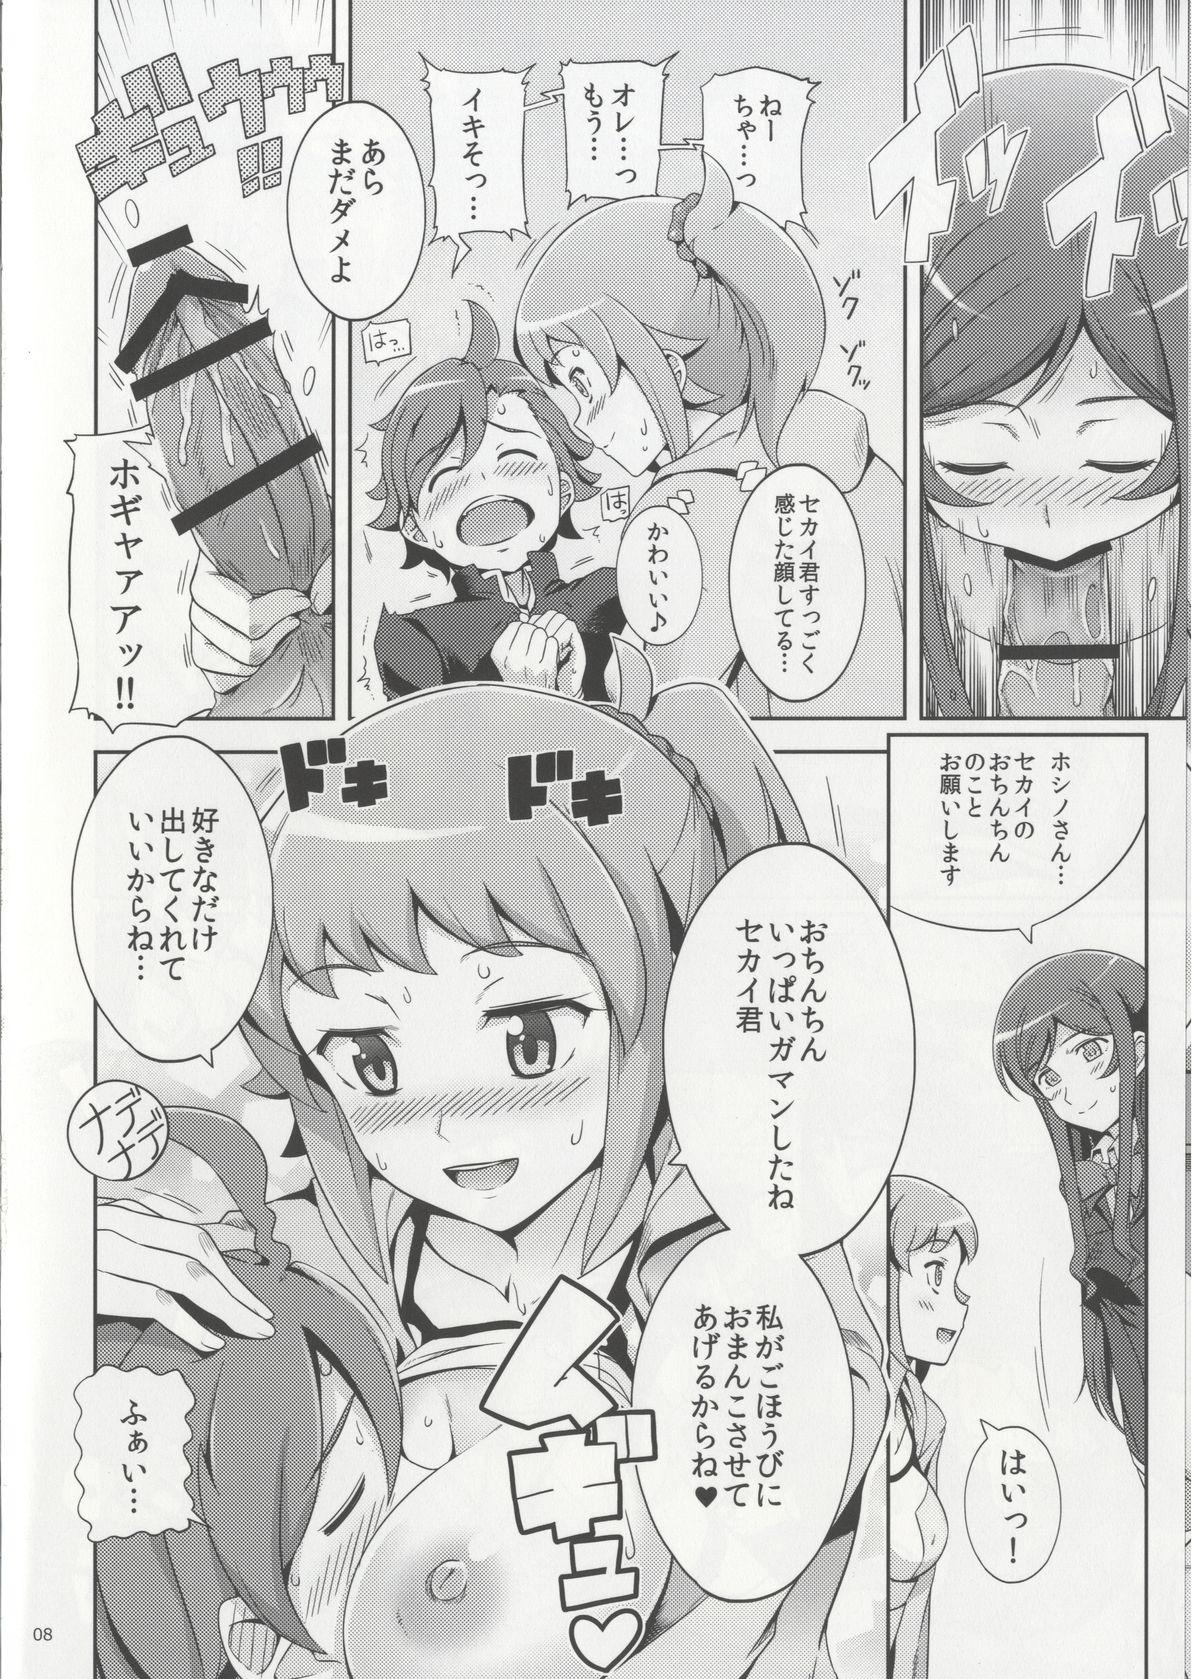 Africa Namahame Try! - Gundam build fighters try Milf - Page 8